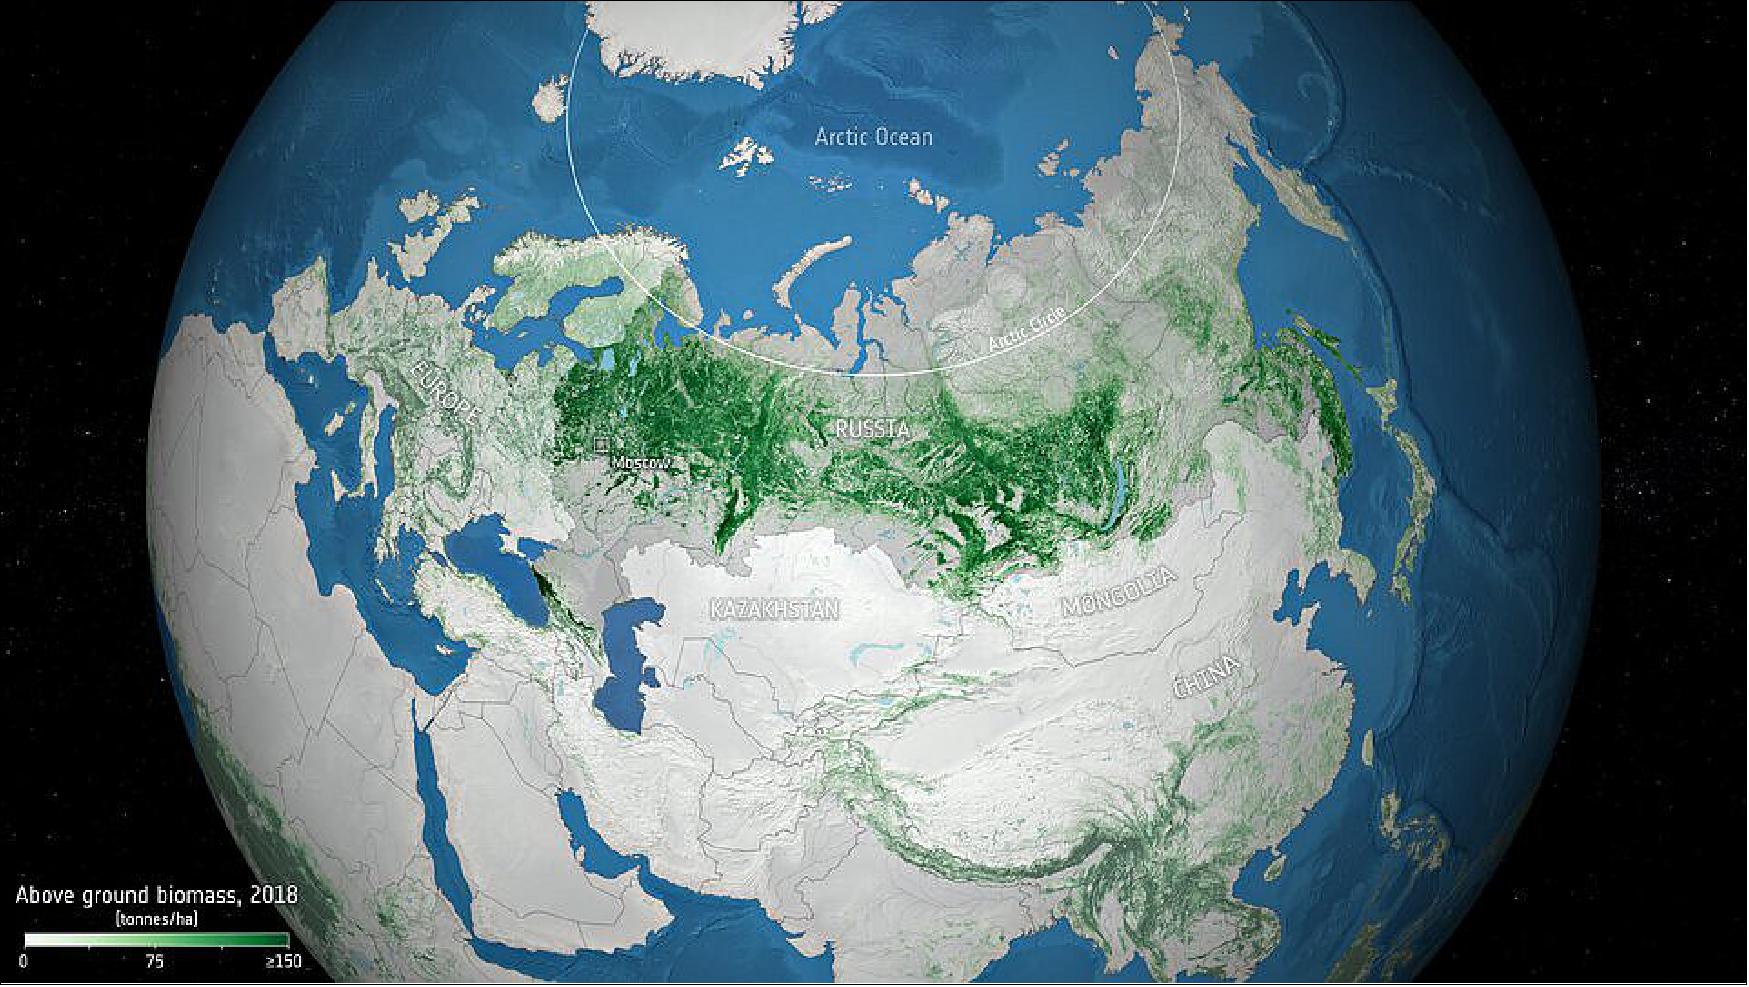 Figure 24: The map shows the above ground biomass in Russia, using data generated by ESA's Climate Change Initiative (CCI) Biomass project [image credit: ESA (data source: CCI Biomass project)]